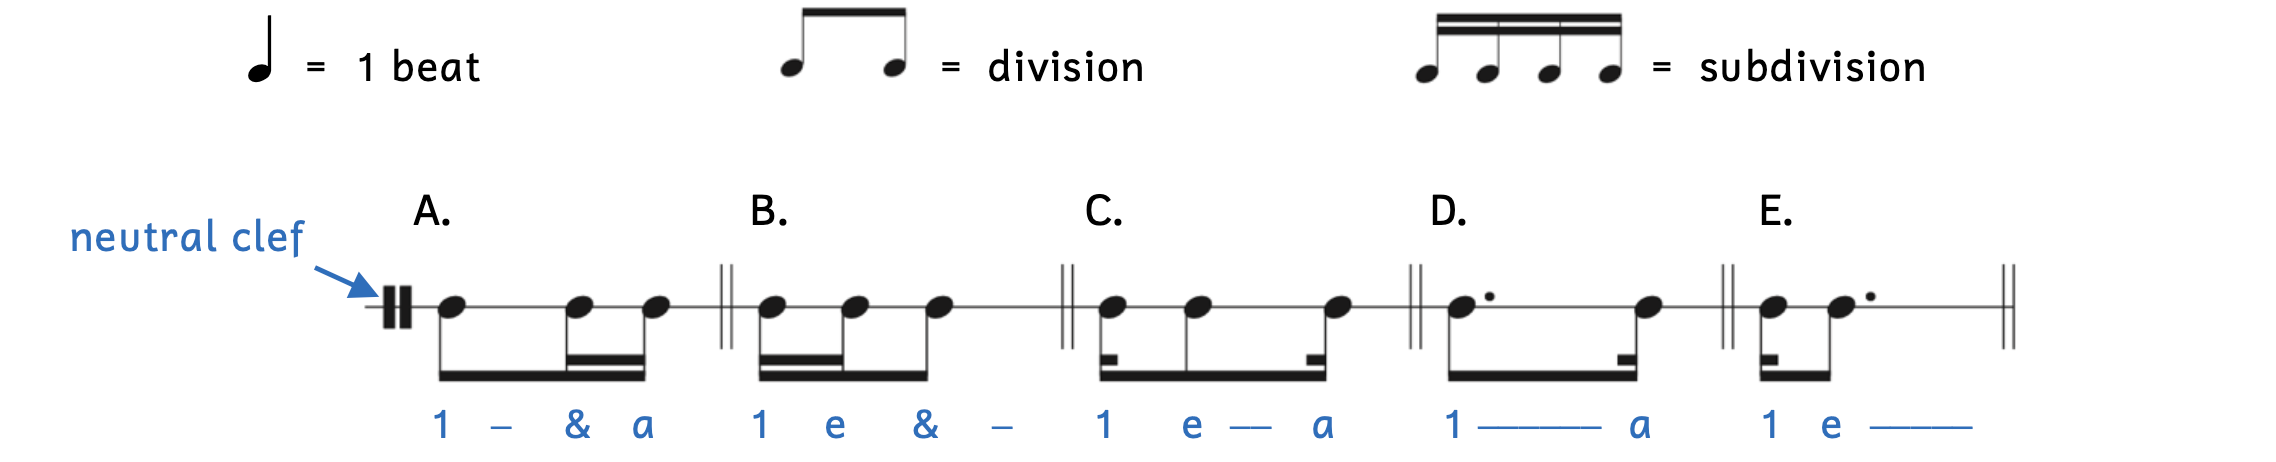 Examples of rhythms combining divisions and subdivisions. A neutral clef is shown. The quarter note equals one beat, the division is two eighth notes, and the subdivision is four sixteenth notes. Example A shows an eighth note beamed to two sixteenth notes. Example B shows two sixteenth notes beamed to an eighth note. Example C shows a sixteenth note, eighth note and sixteenth note all beamed together. Example D shows a dotted eighth note beamed to a sixteenth note. Example E shows a sixteenth note beamed to a dotted eighth note. Listen to the rhythm syllables on the sound clip below.